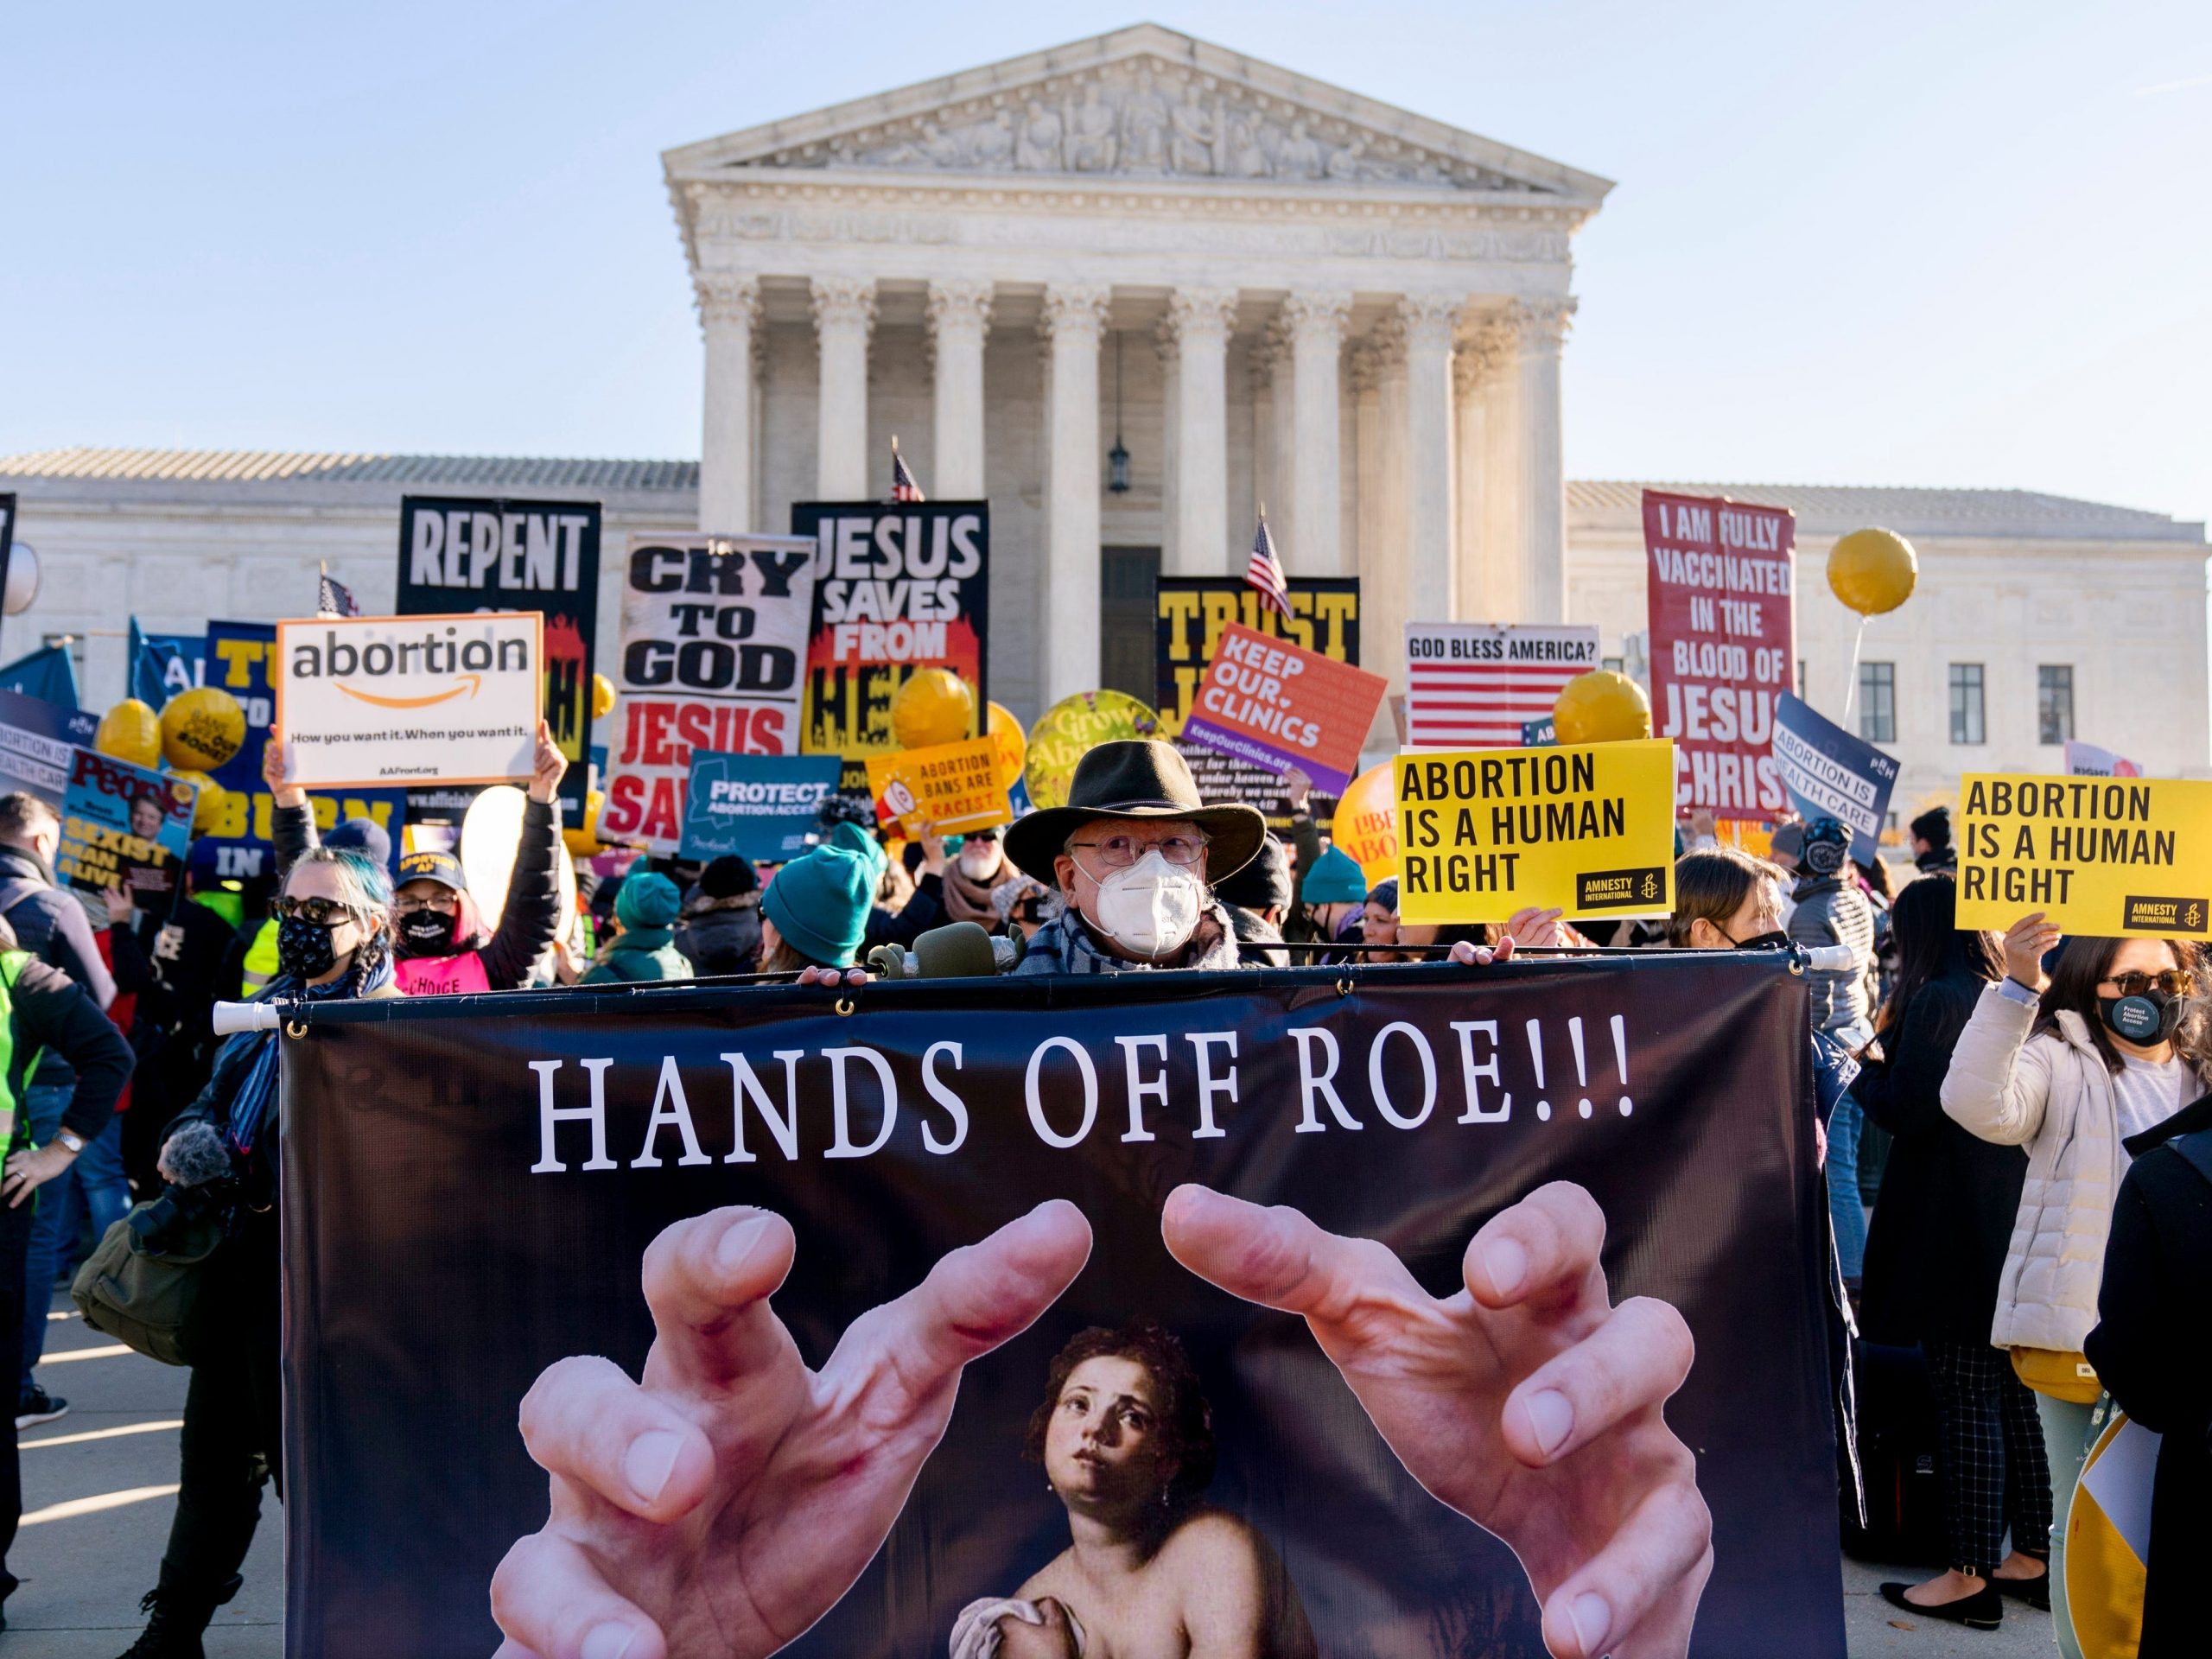 Stephen Parlato of Boulder, Colo., holds a sign that reads "Hands Off Roe!!!" as abortion rights advocates and anti-abortion protesters demonstrate in front of the U.S. Supreme Court, Wednesday, Dec. 1, 2021, in Washington, as the court hears arguments in a case from Mississippi, where a 2018 law would ban abortions after 15 weeks of pregnancy, well before viability.